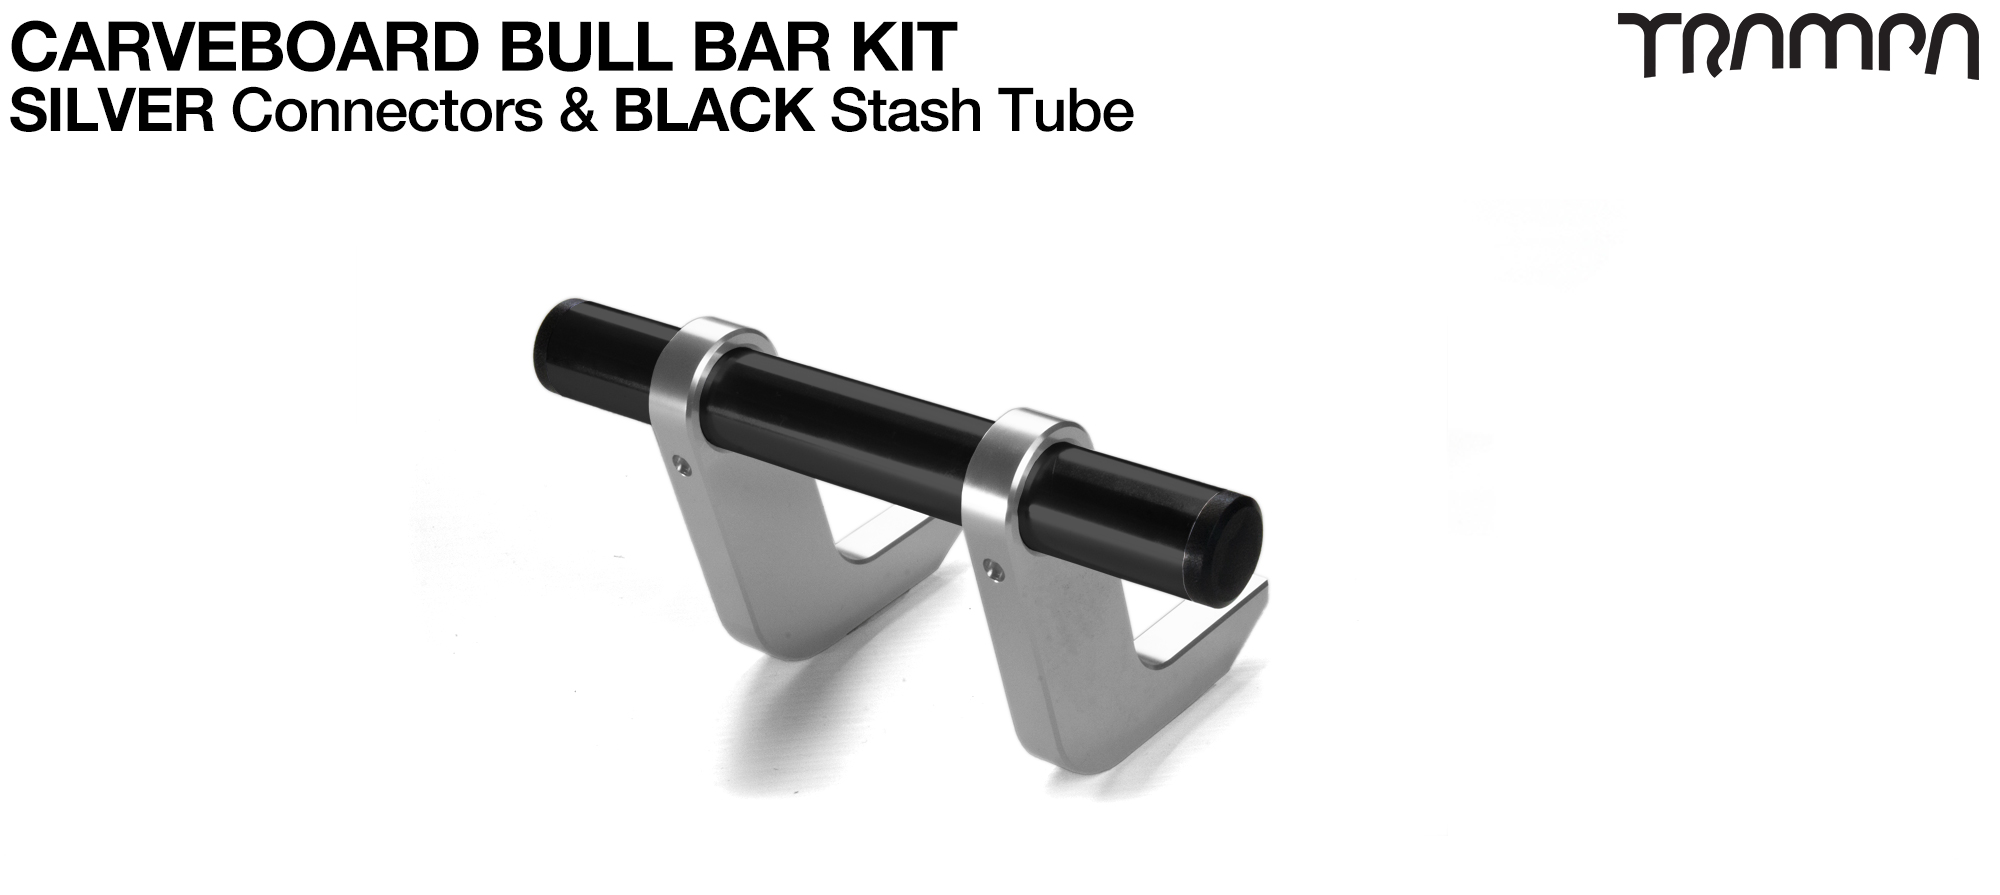 SILVER Uprights & BLACK Crossbar BULL BARS for CARVE BOARDS using T6 Heat Treated CNC'd Aluminum Clamps, Hollow Aluminium Stash Tubes with Rubber end bungs 